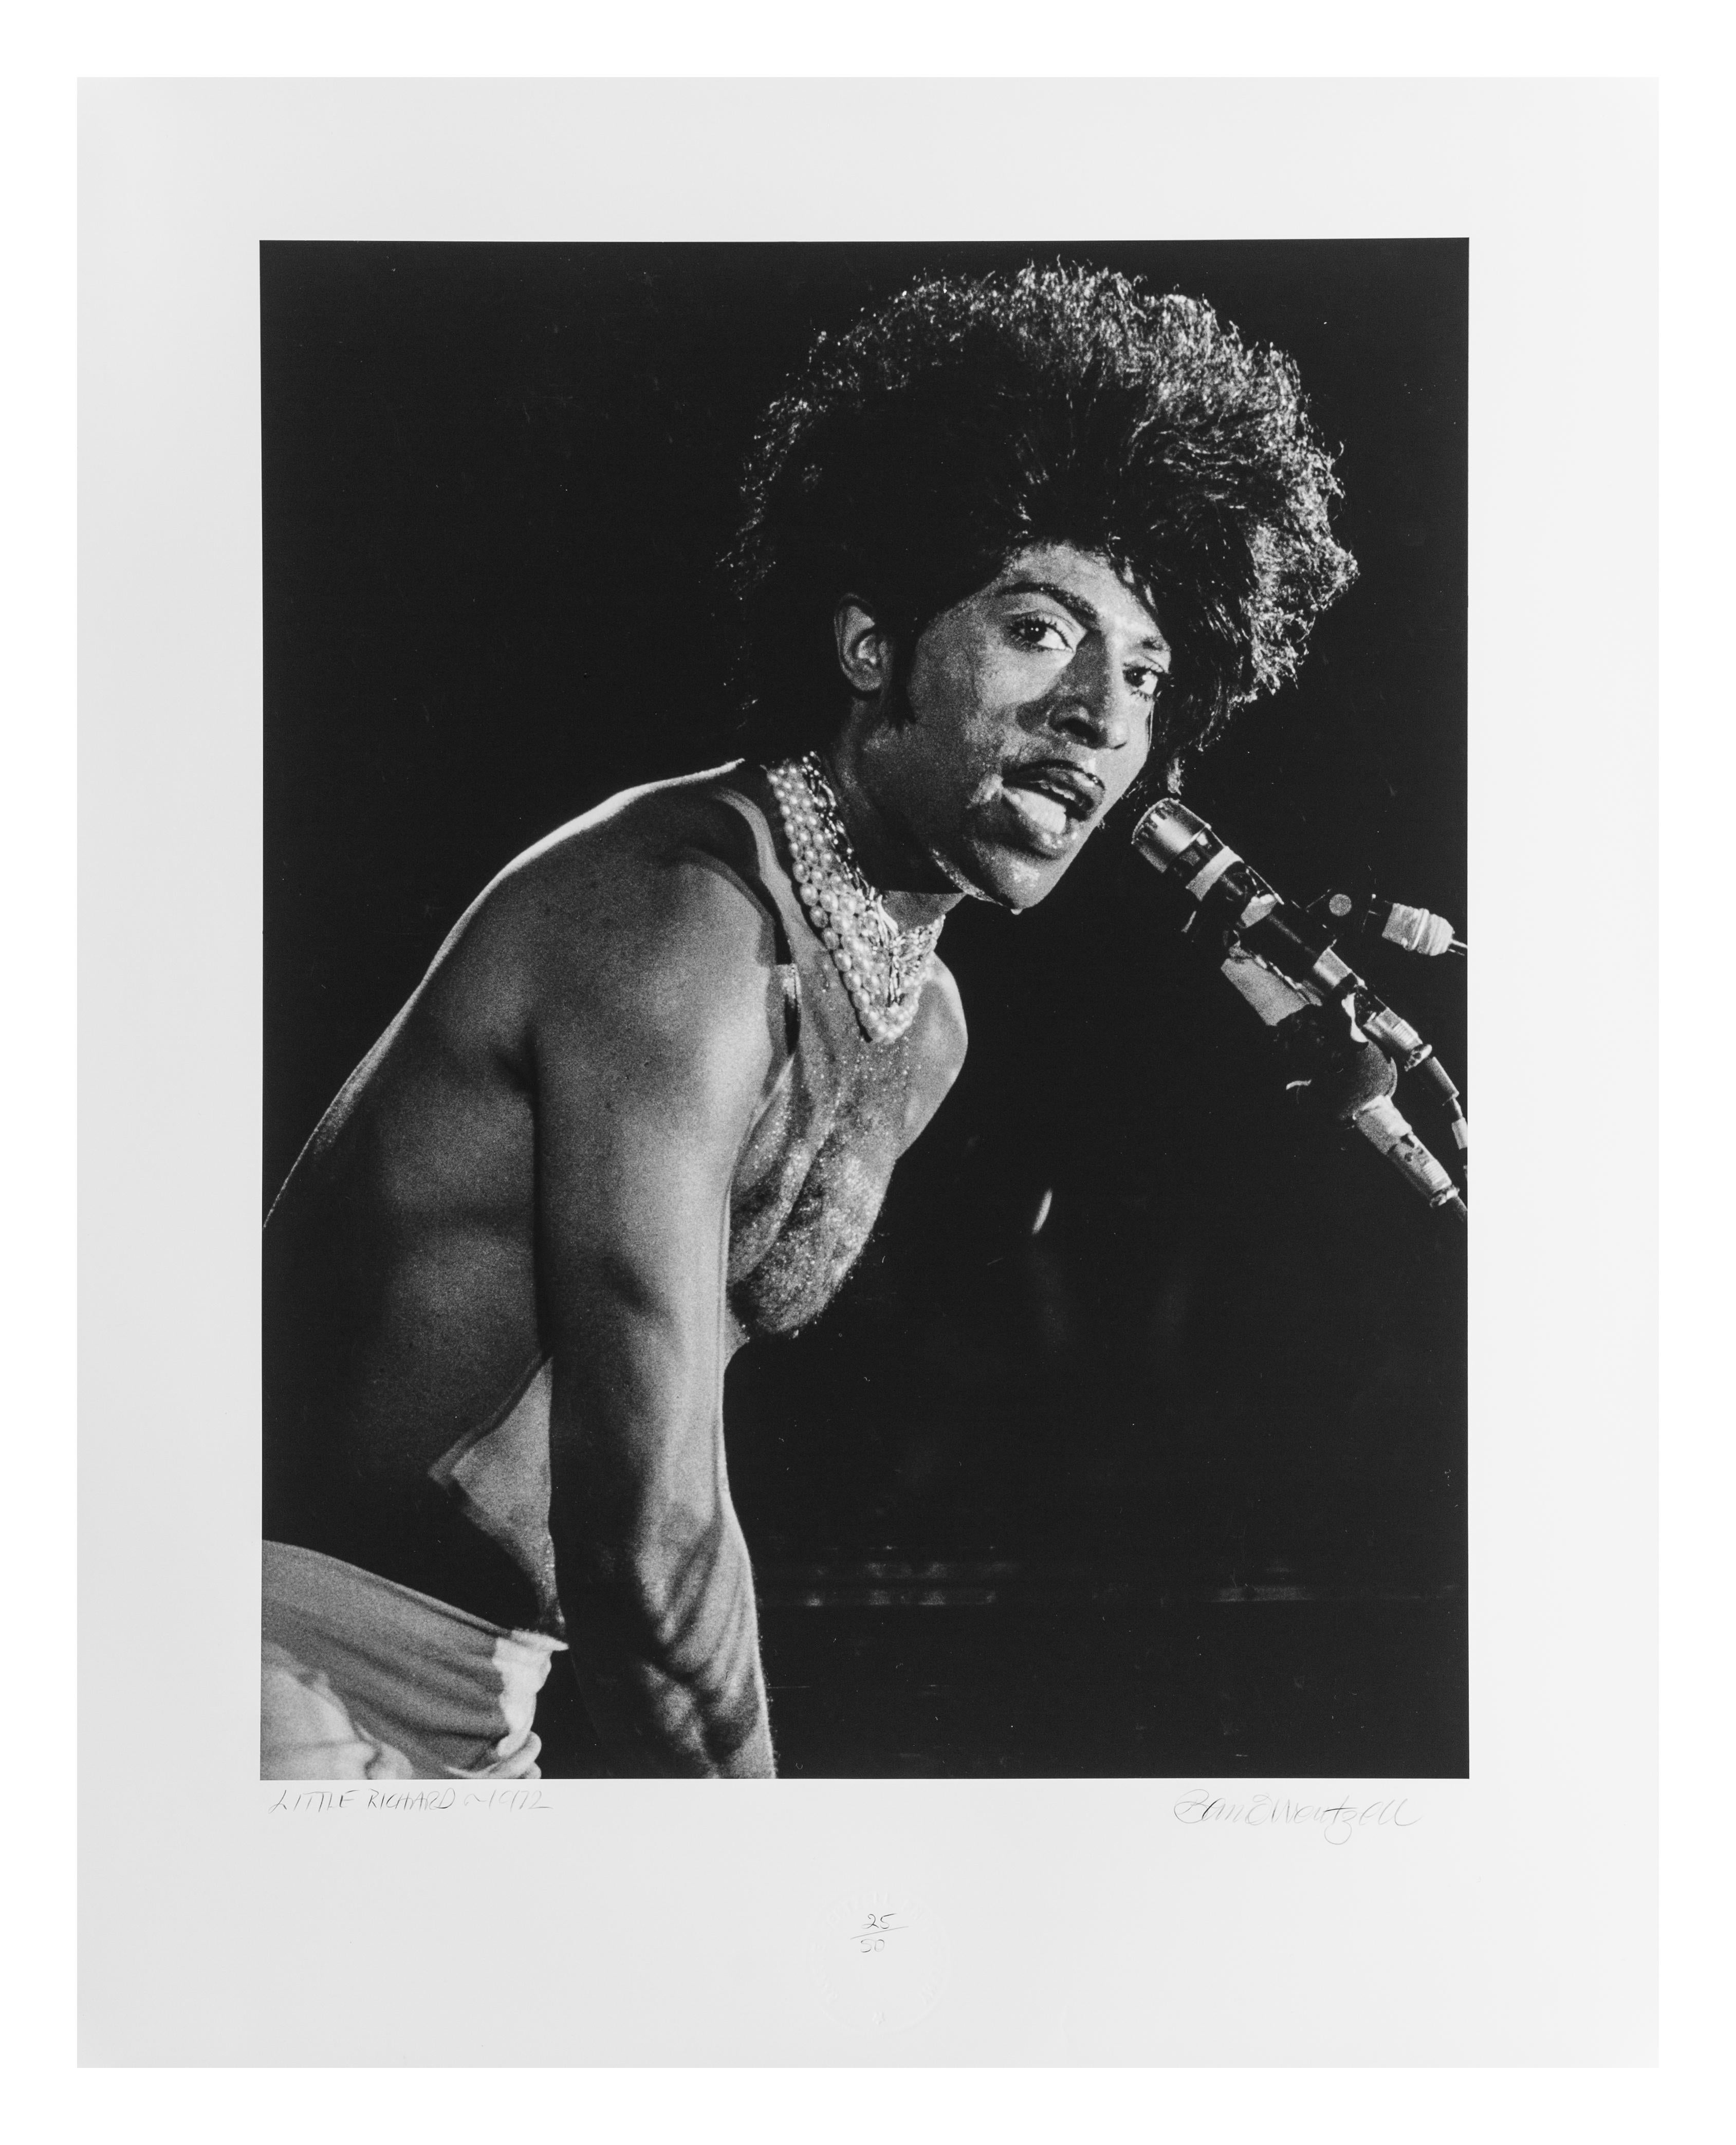 Barrie Wentzell Black and White Photograph - Little Richard 